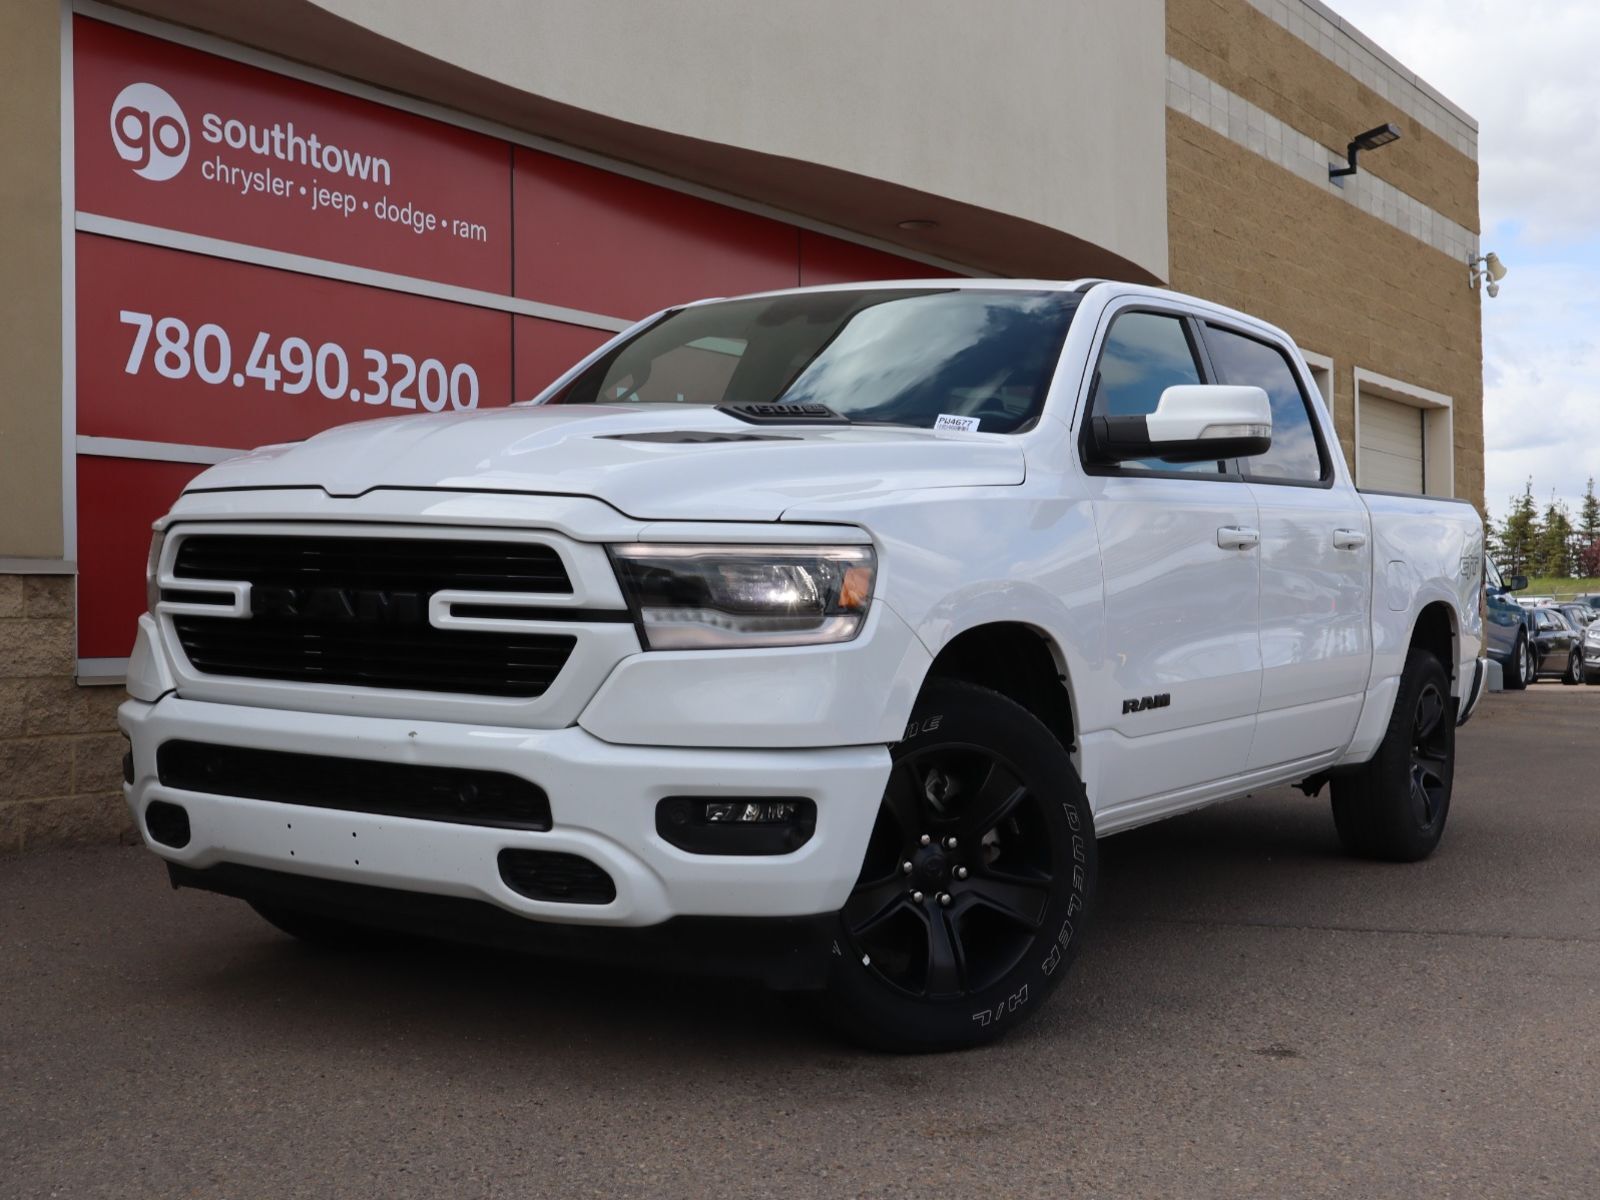 2022 Ram 1500 SPORT GT IN BRIGHT WHITE EQUIPPED WITH A 5.7L HEMI